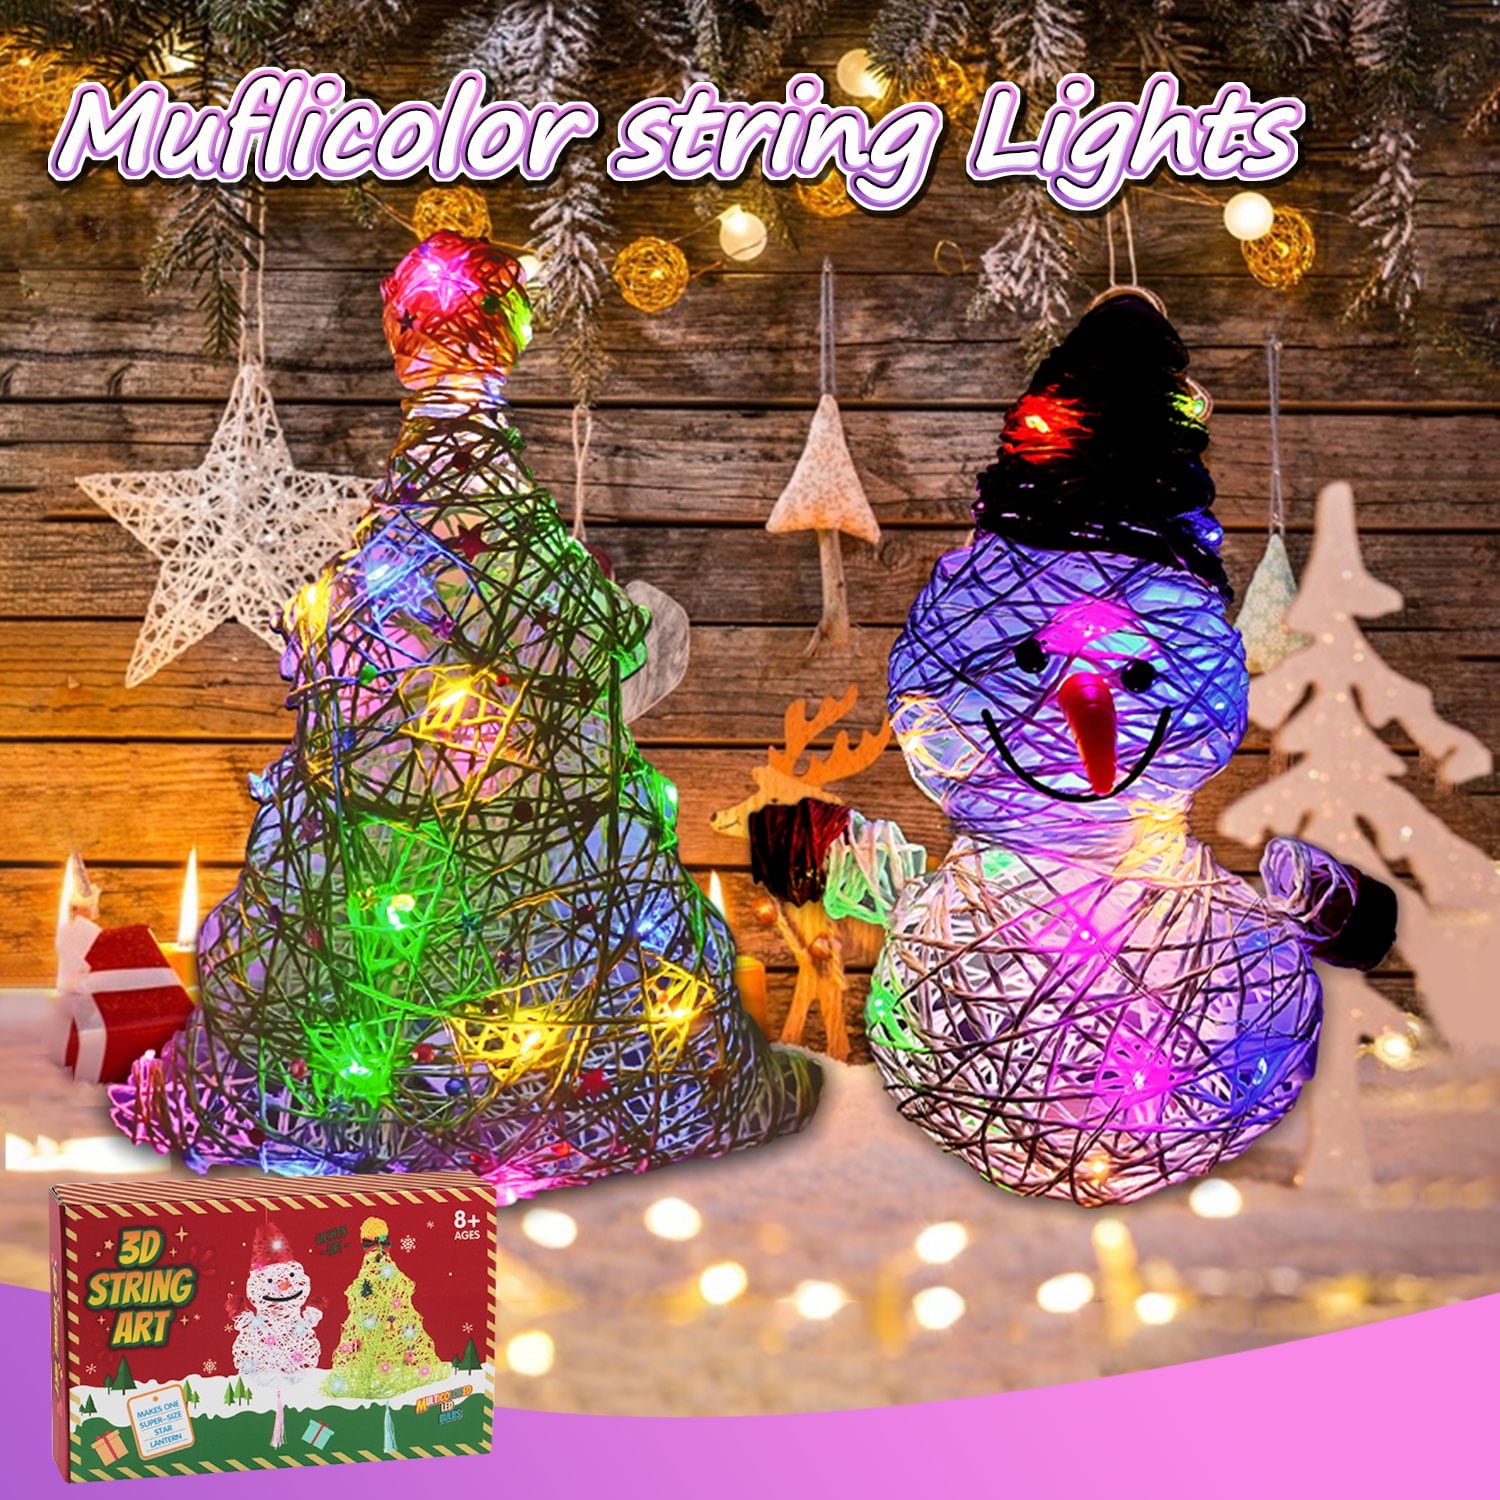  3D String Art Kit for Kids - Makes a Light-Up Star Lantern with  20 Multi-Colored LED Bulbs - Kids Gifts - Crafts for Girls and Boys Ages  8-12 - DIY Arts